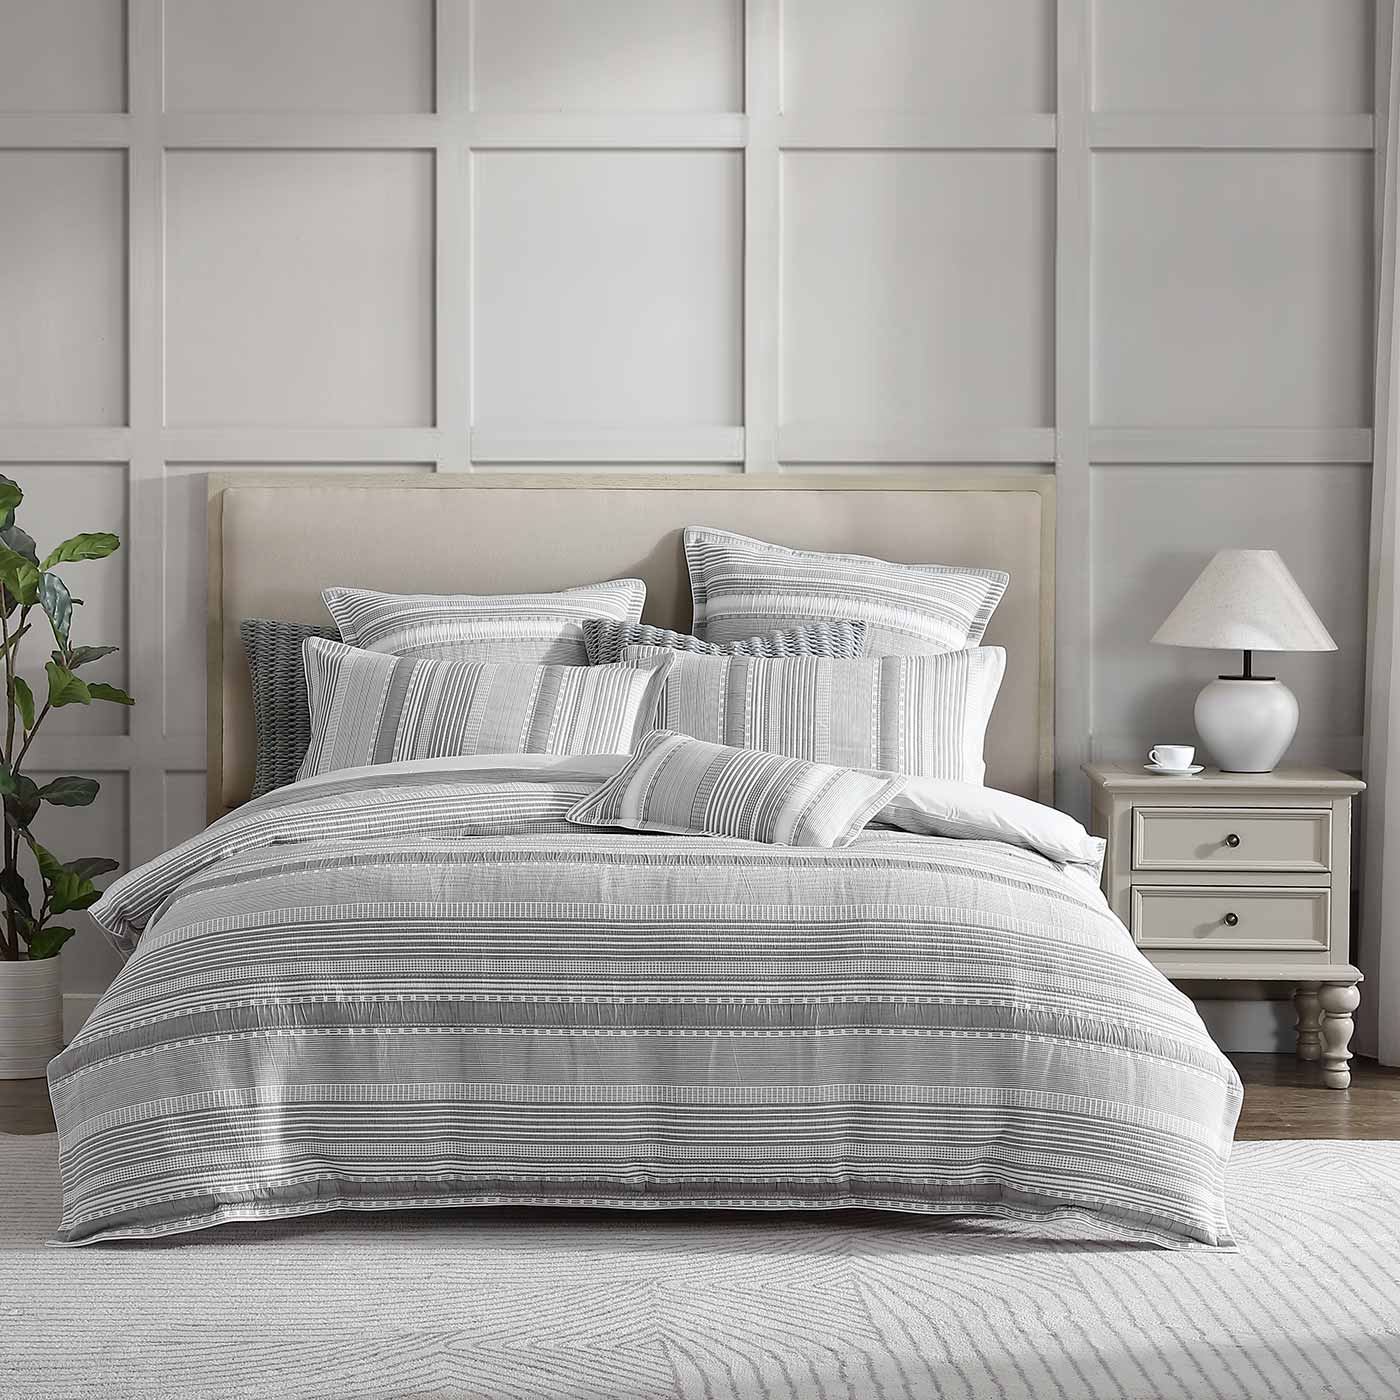 Sinclair Silver combines a modern coastal look with the tactile softness of quilted matelasse. A series of horizontal stripes alternate between plains and patterns balanced by the fresh, tonal palette. Self-flanged and piped edges complete the look.